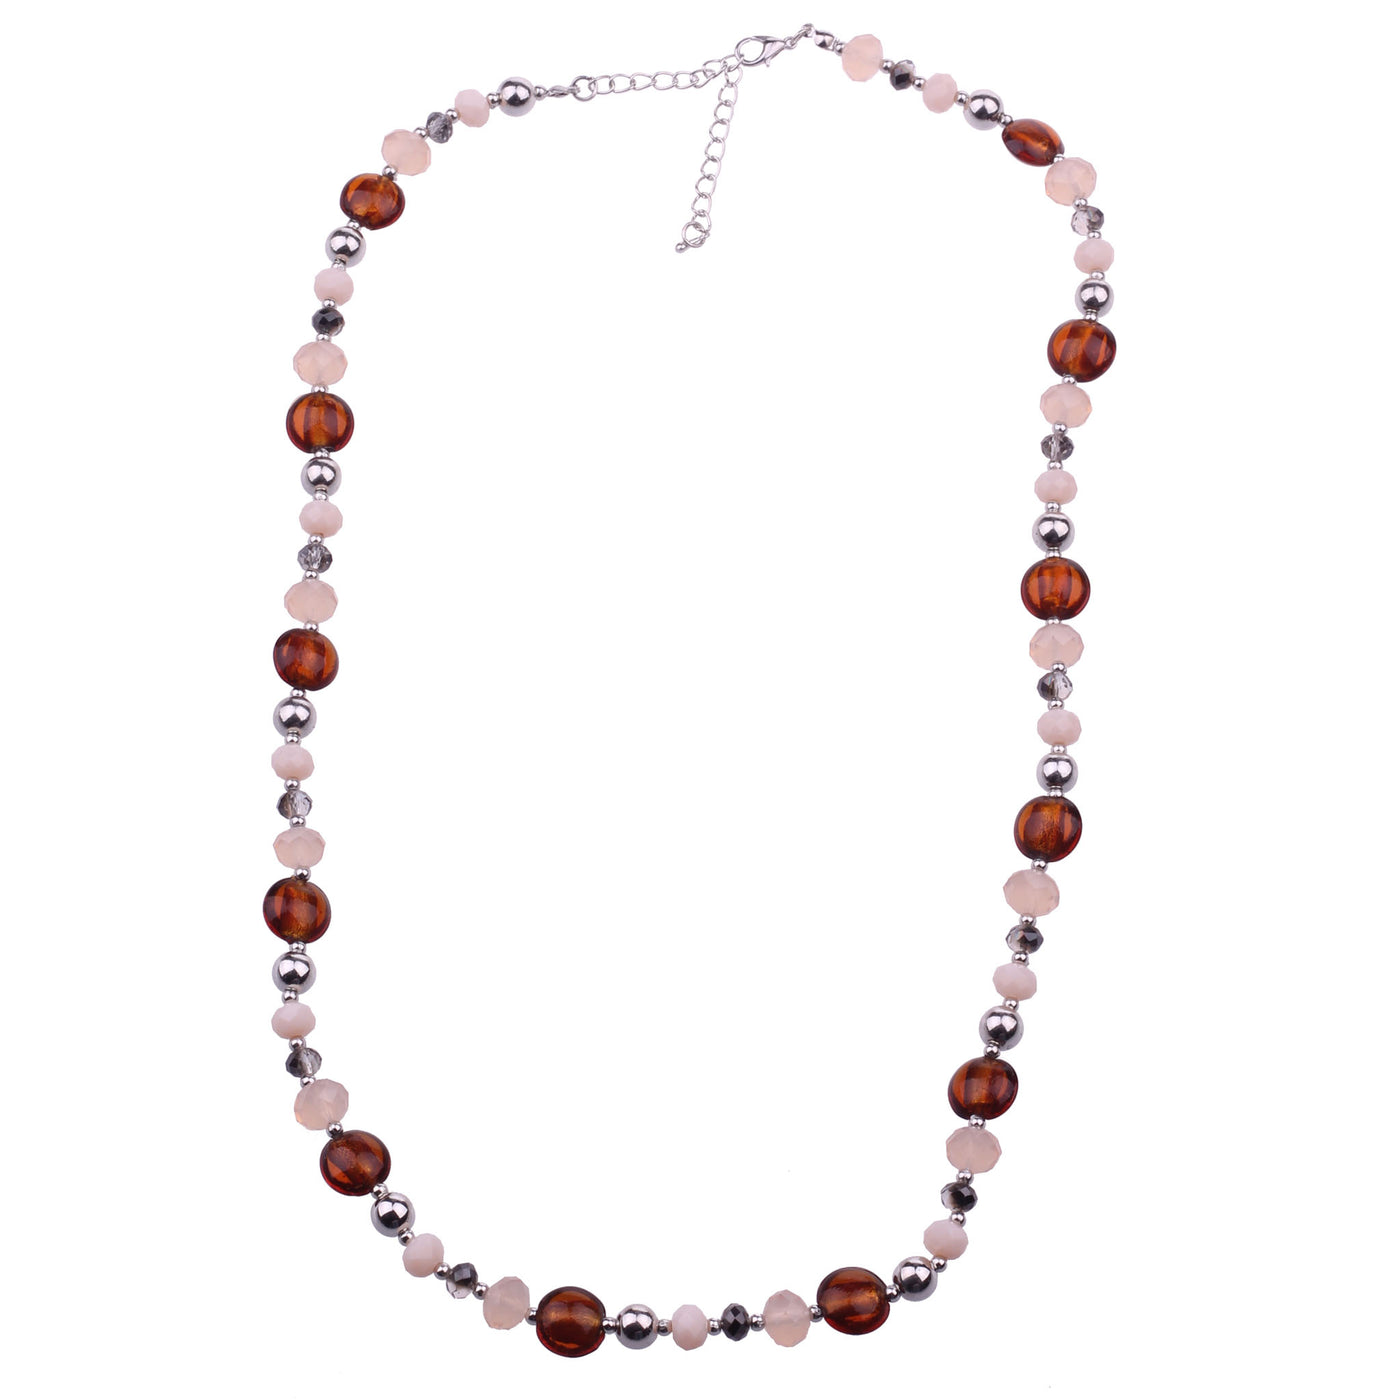 A glass bead necklace